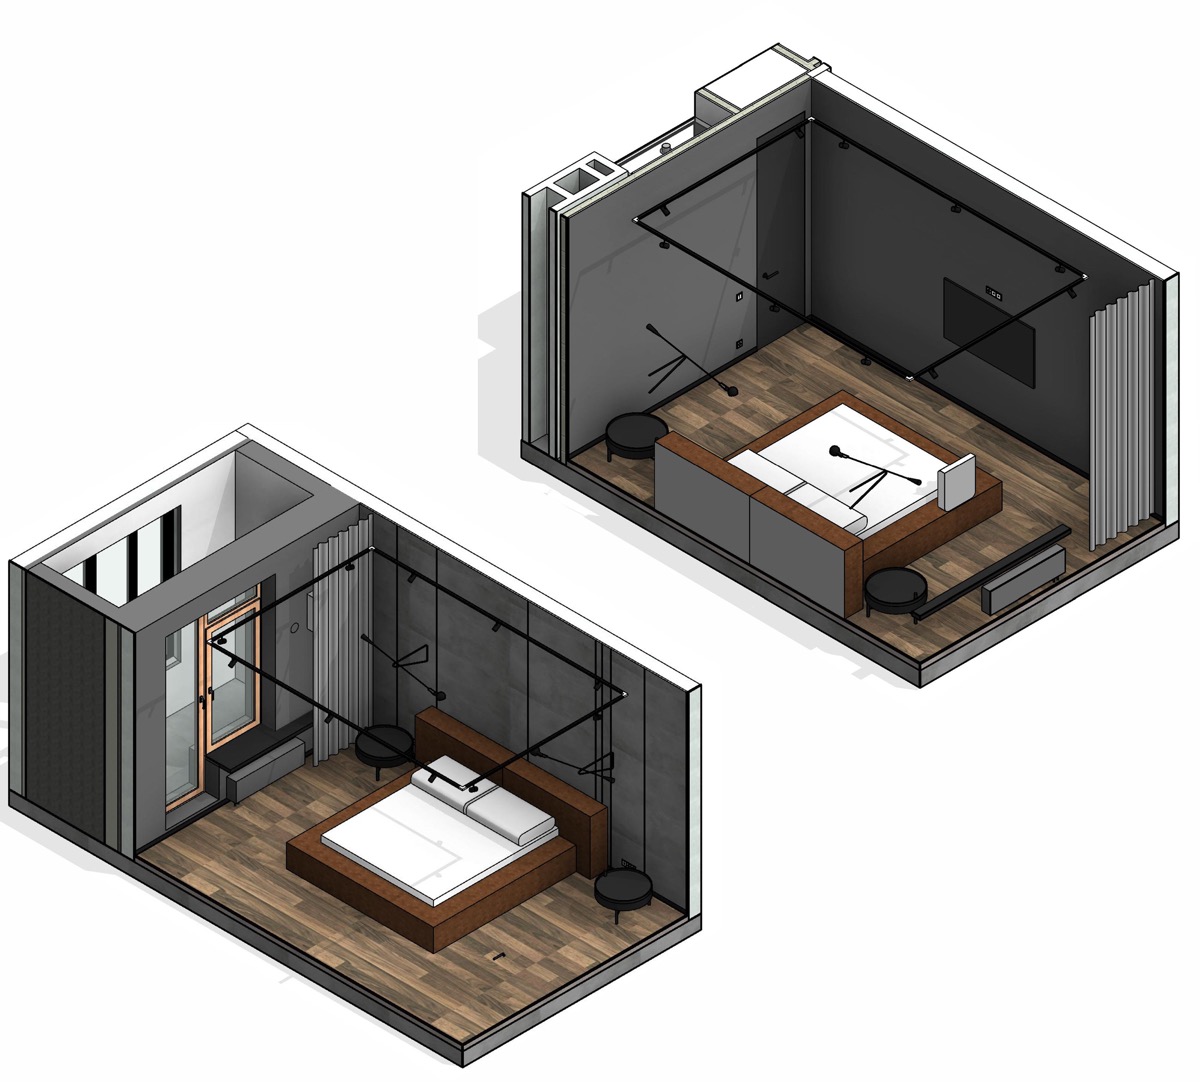 Room Planner: Home Interior 3D - Apps on Google Play